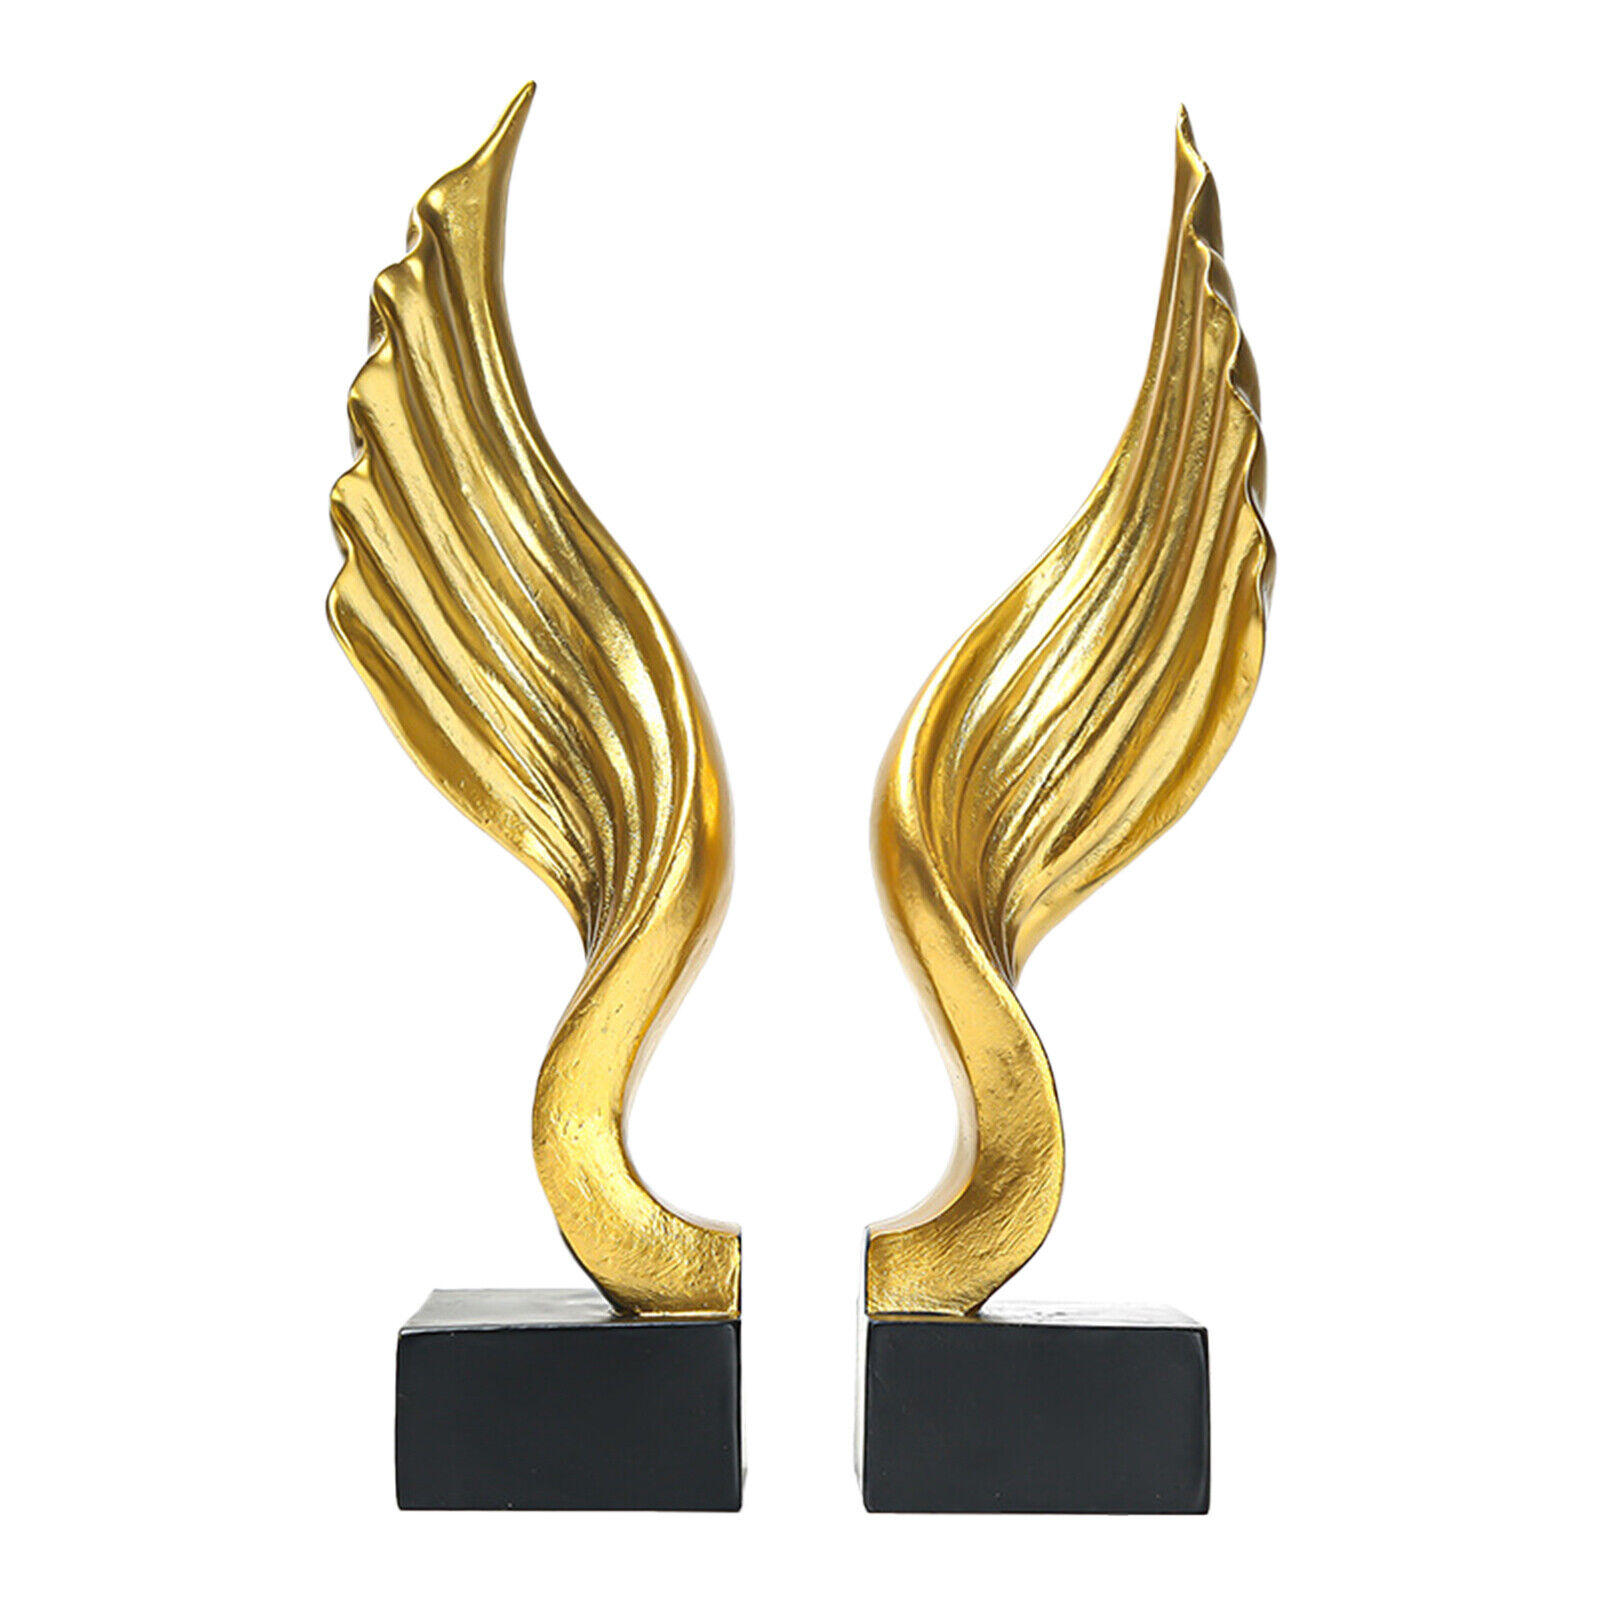 Angel Wing Book Stand Resin Bookends Statue Bedroom Desk Ornament